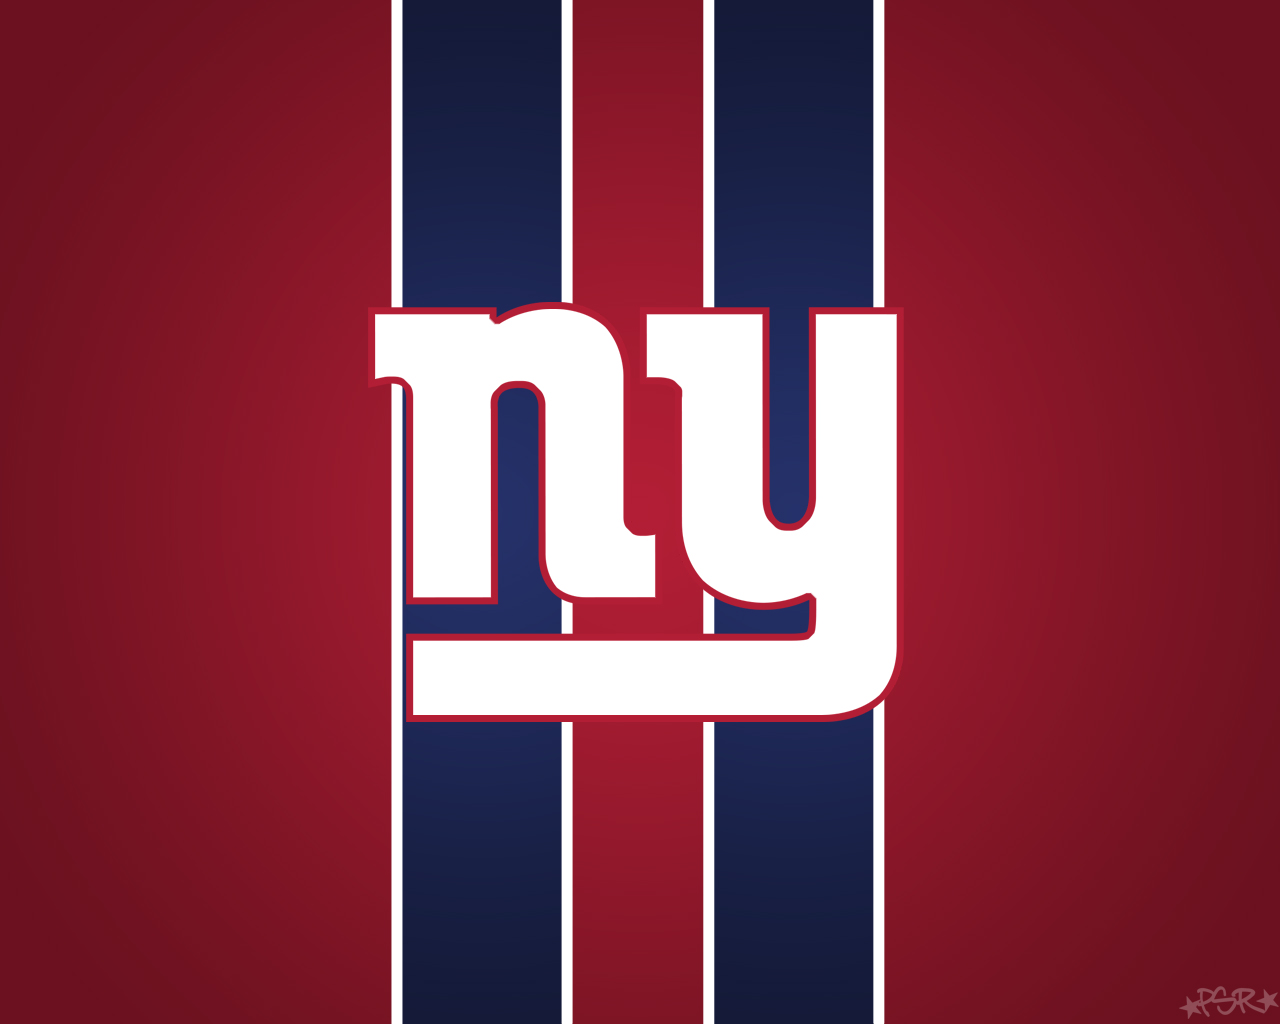 New York GIANTS Wallpaper Collection | Sports Geekery